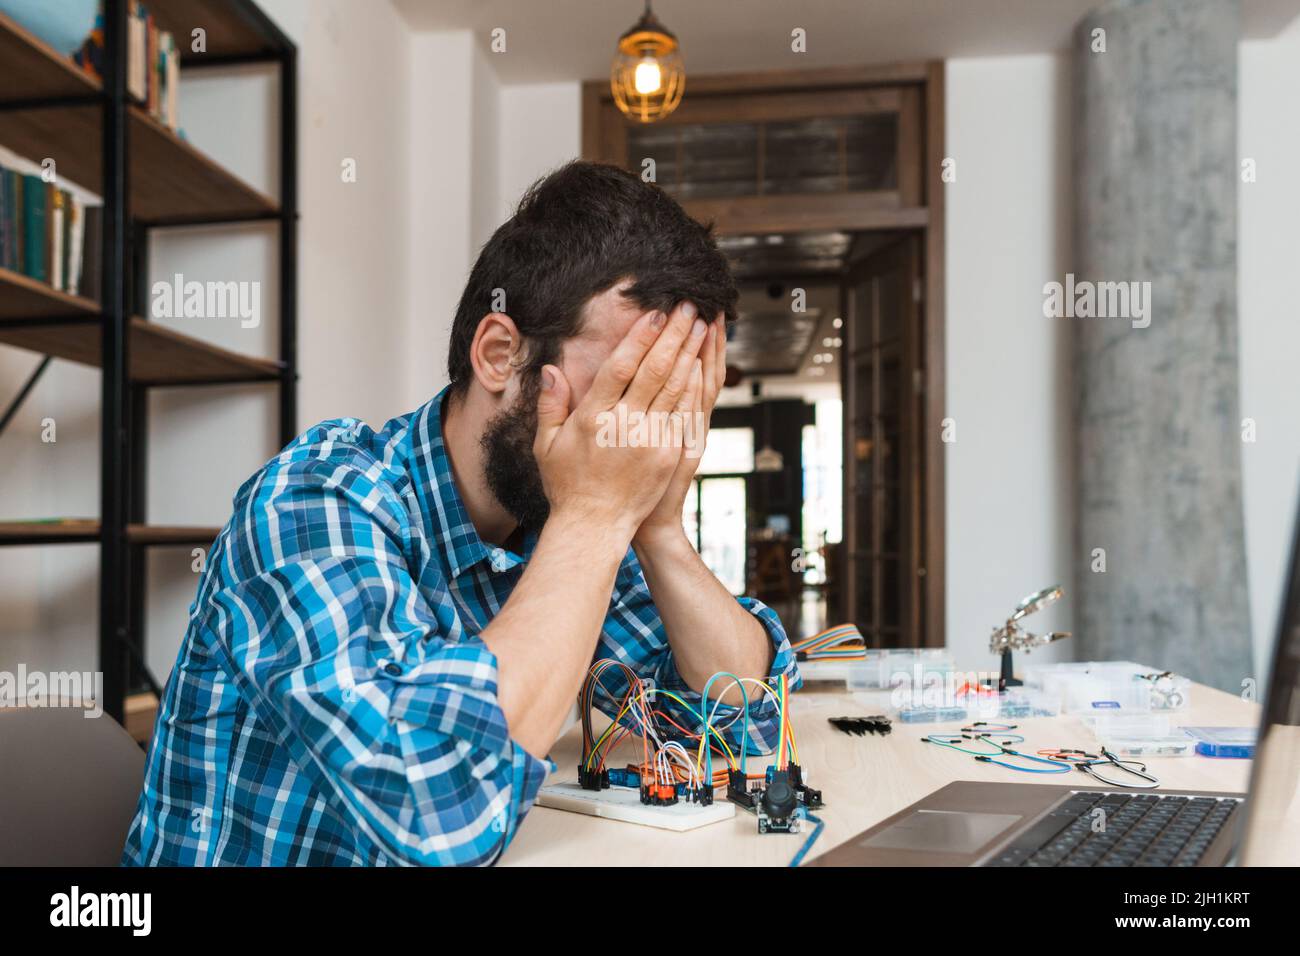 Engineer closed his face in despair, free space Stock Photo